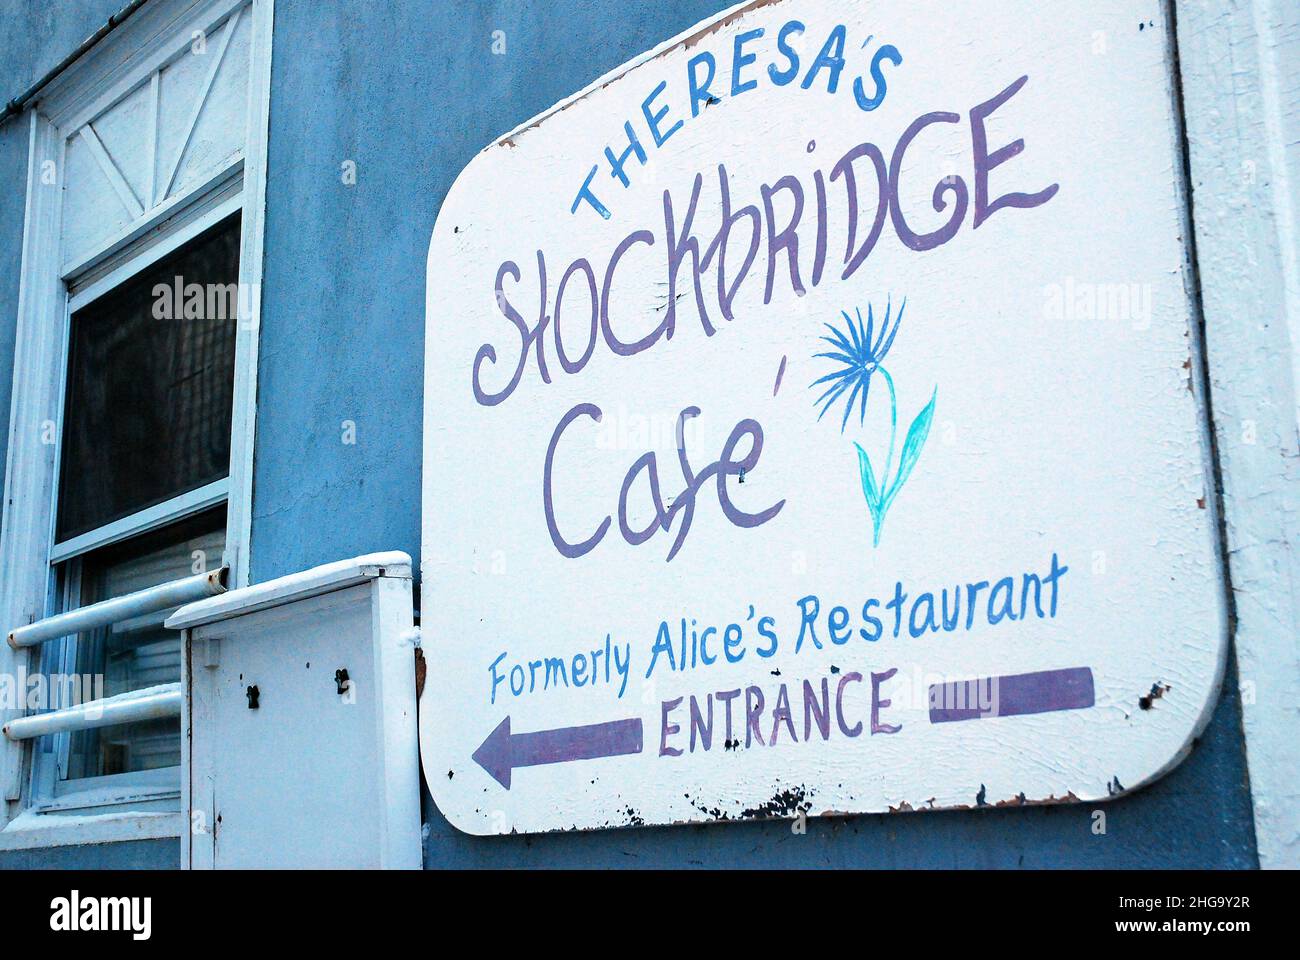 The Stockbridge Cafe, formerly Alice's Restaurant, Made Famous in a Song by Arlo Guthrie Stock Photo